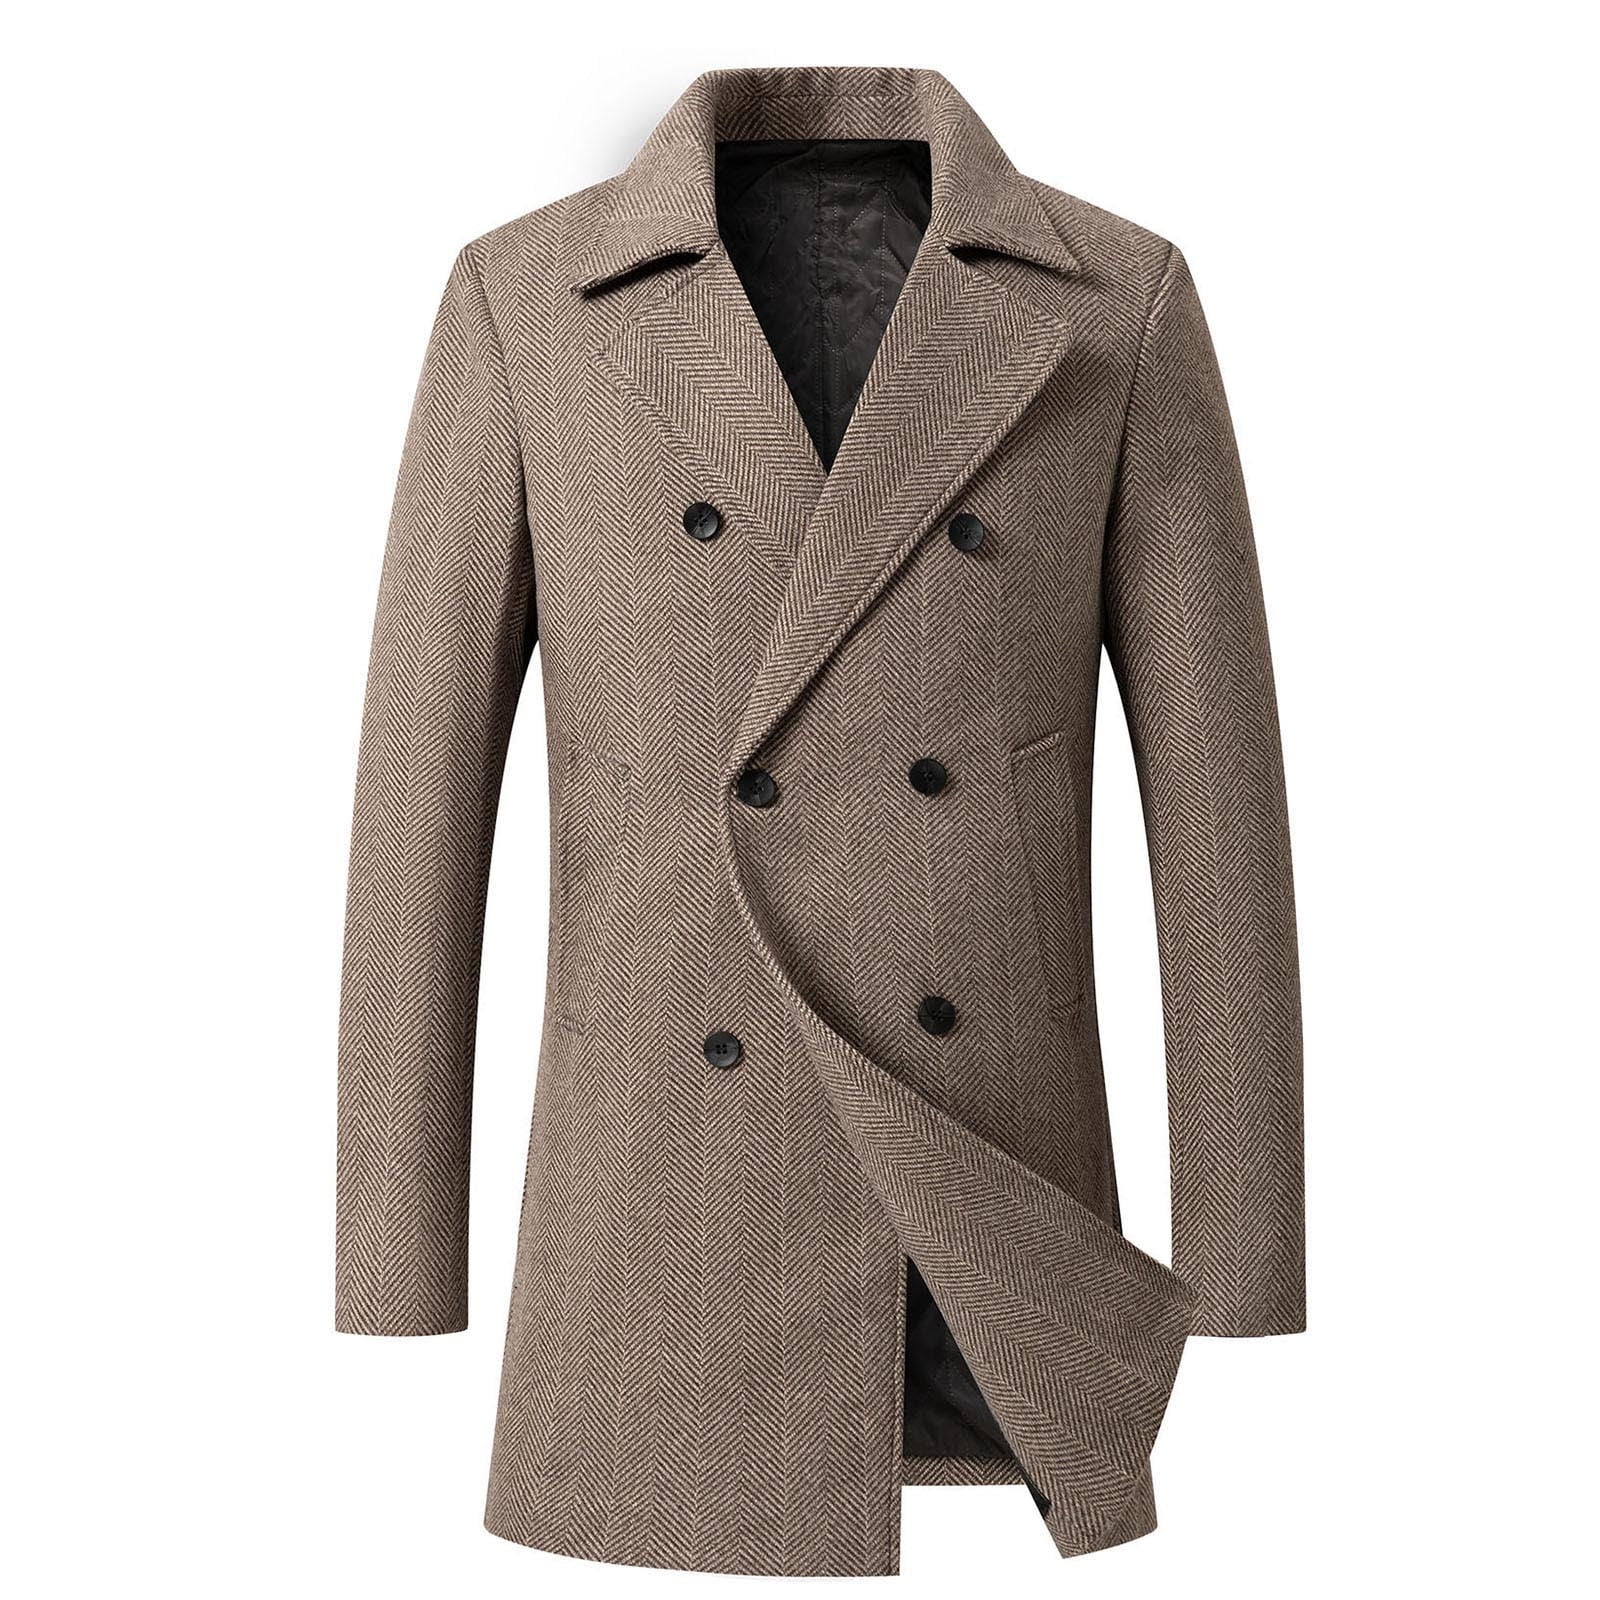 Winter Mens Wool Warm Long Military Jacket Double Breasted Overcoat Trench  Coat